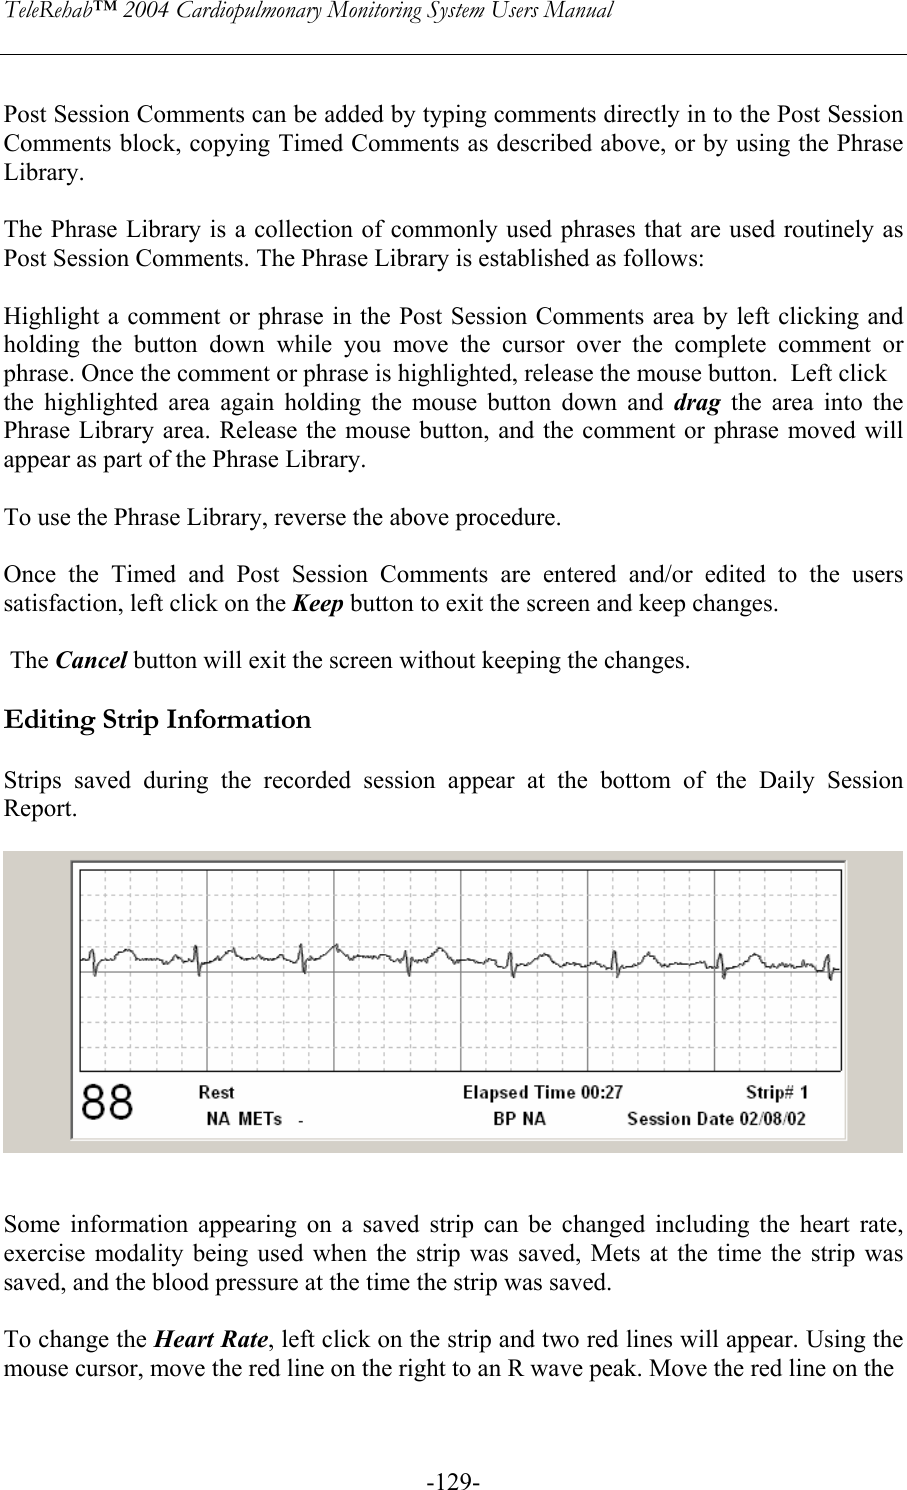 TeleRehab™ 2004 Cardiopulmonary Monitoring System Users Manual    -129- Post Session Comments can be added by typing comments directly in to the Post Session Comments block, copying Timed Comments as described above, or by using the Phrase Library.  The Phrase Library is a collection of commonly used phrases that are used routinely as Post Session Comments. The Phrase Library is established as follows:  Highlight a comment or phrase in the Post Session Comments area by left clicking and holding the button down while you move the cursor over the complete comment or phrase. Once the comment or phrase is highlighted, release the mouse button.  Left click  the highlighted area again holding the mouse button down and drag the area into the Phrase Library area. Release the mouse button, and the comment or phrase moved will appear as part of the Phrase Library.   To use the Phrase Library, reverse the above procedure.  Once the Timed and Post Session Comments are entered and/or edited to the users satisfaction, left click on the Keep button to exit the screen and keep changes.   The Cancel button will exit the screen without keeping the changes.  Editing Strip Information  Strips saved during the recorded session appear at the bottom of the Daily Session Report.      Some information appearing on a saved strip can be changed including the heart rate, exercise modality being used when the strip was saved, Mets at the time the strip was saved, and the blood pressure at the time the strip was saved.  To change the Heart Rate, left click on the strip and two red lines will appear. Using the mouse cursor, move the red line on the right to an R wave peak. Move the red line on the   